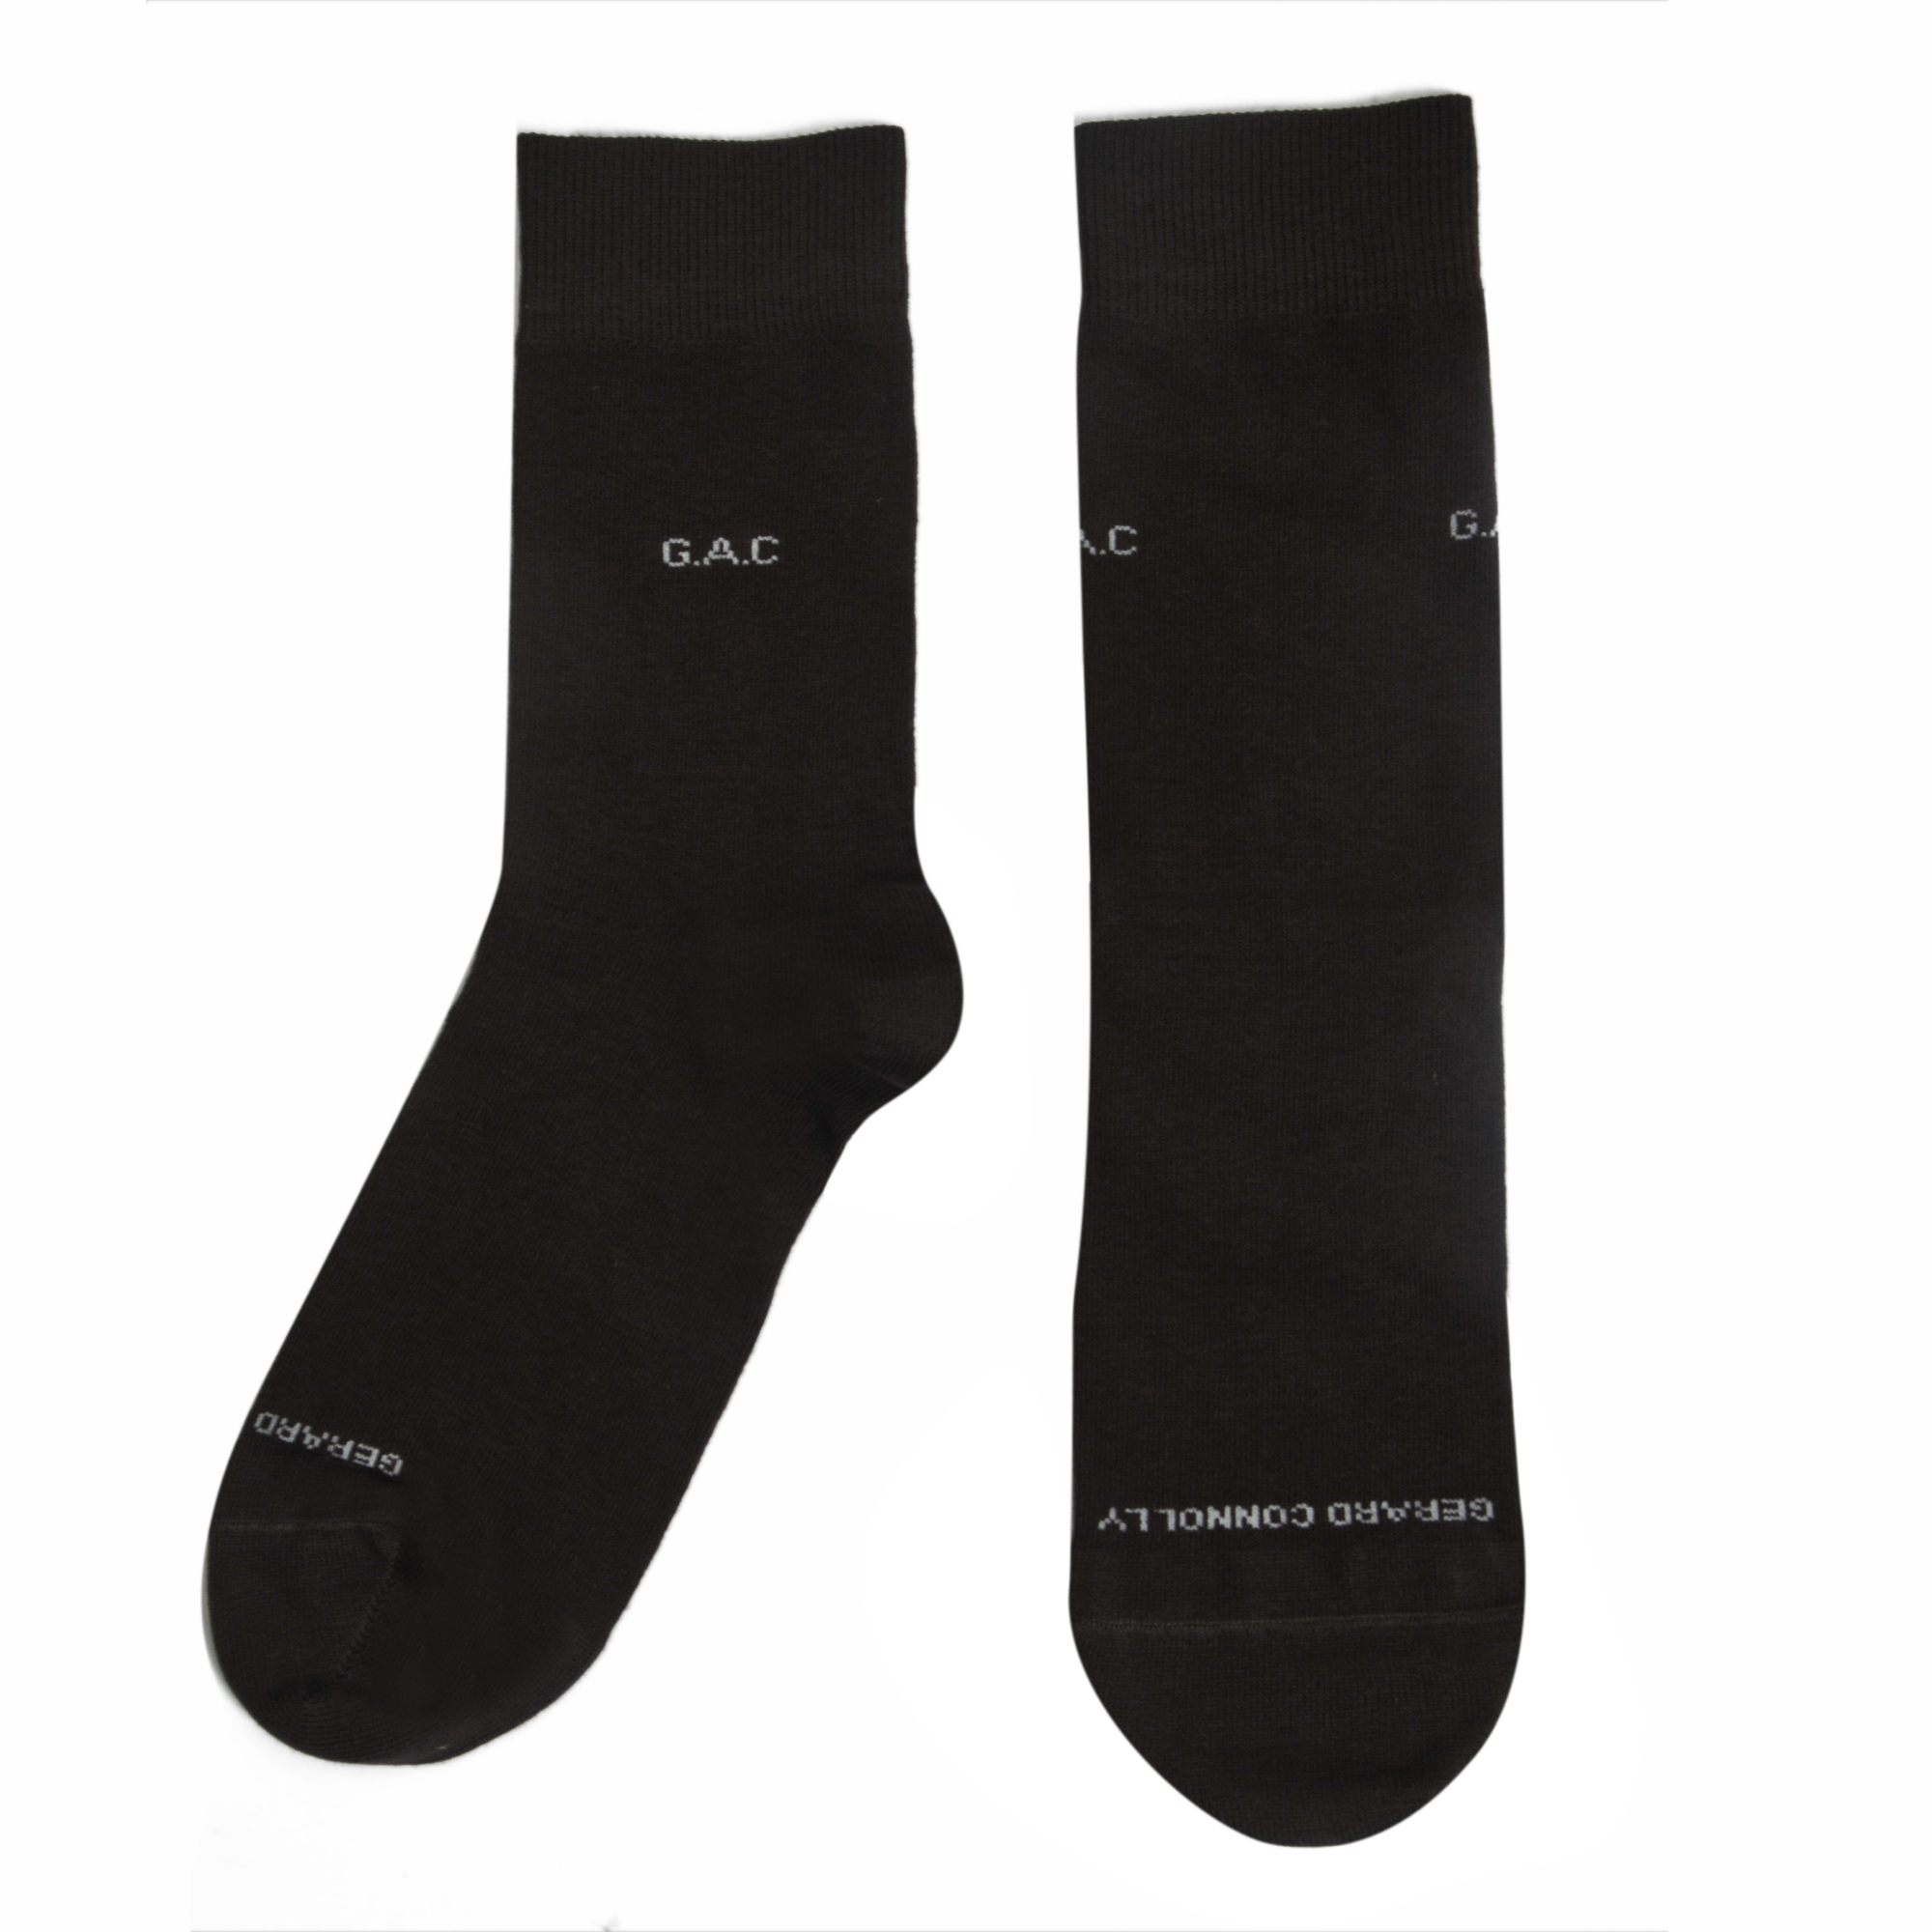 UK Size 7-11 EU size 41-46 Five pair Men/'s Bespoke Monogram Dress socks x27 sock colours available to select from. US size 8-12